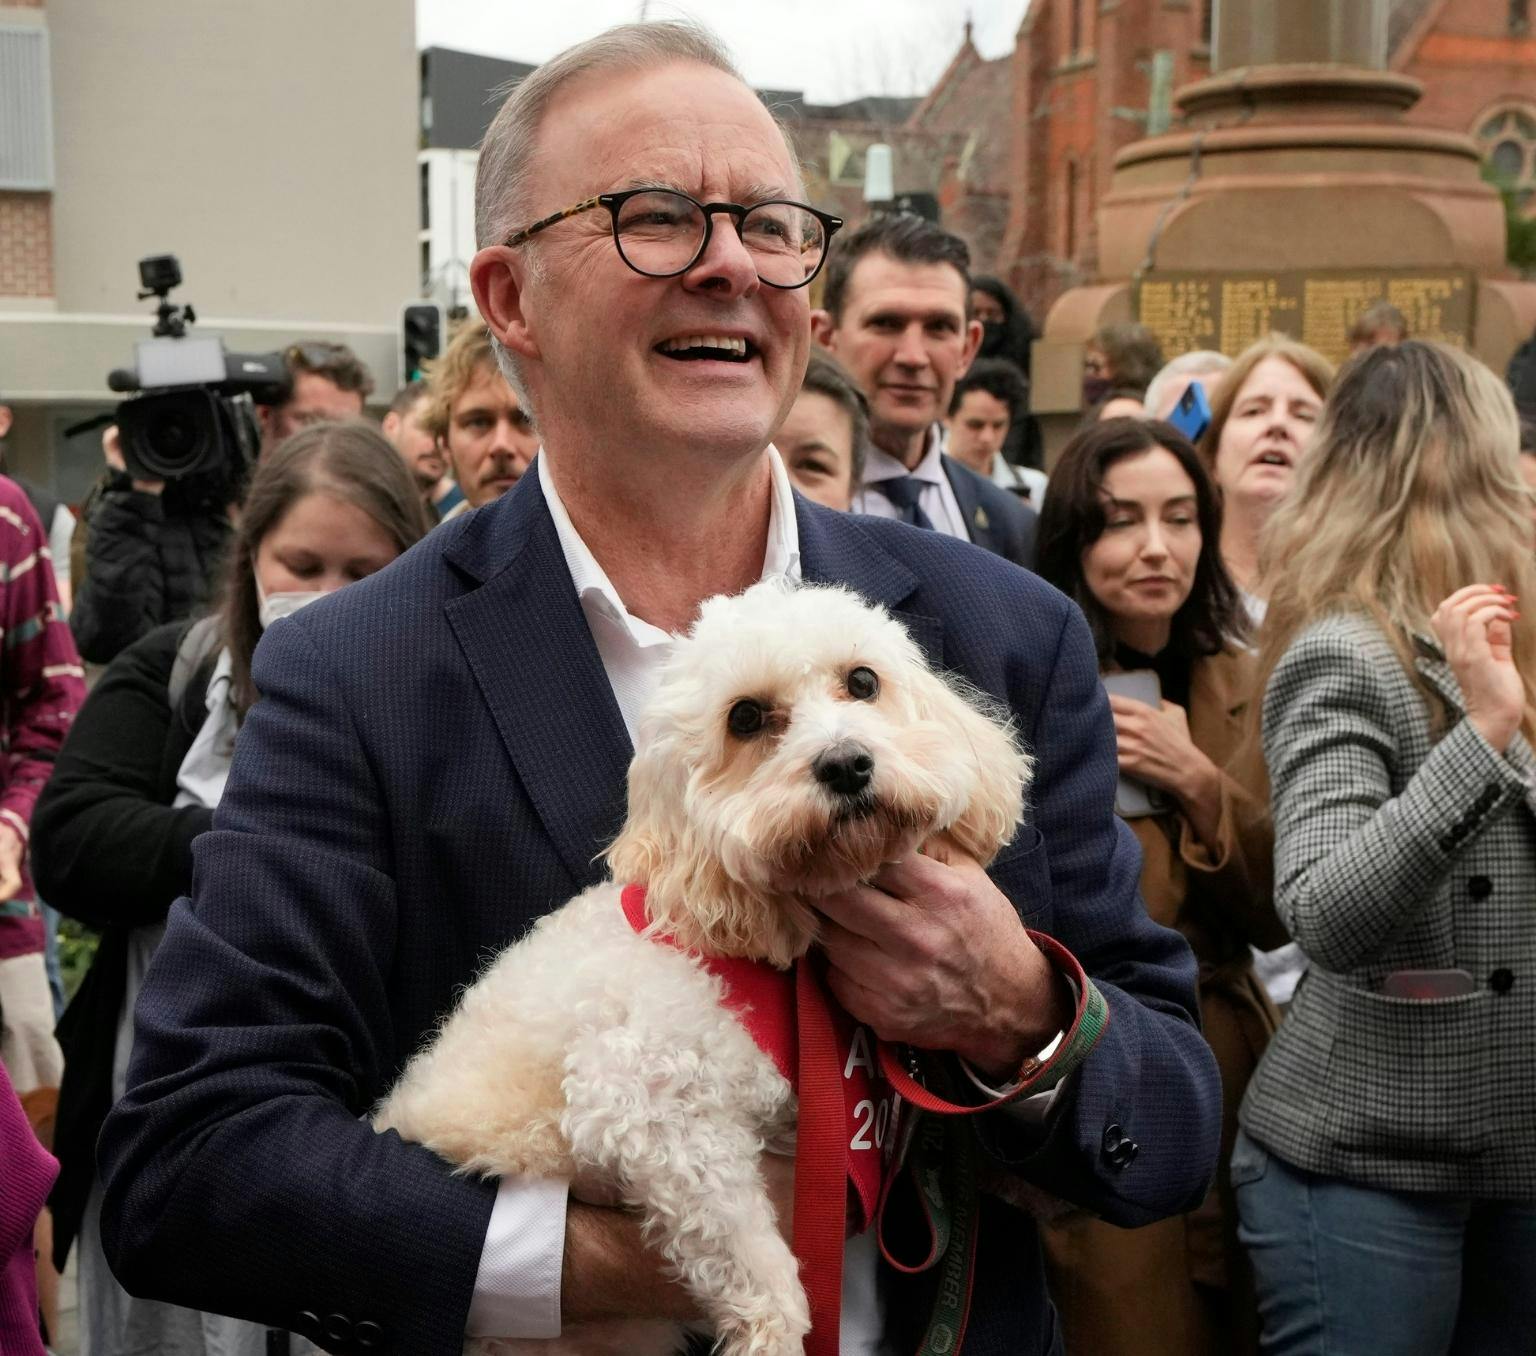 Anthony Albanese holds his small white dog Toto while surrounded by people on the campaign trail.